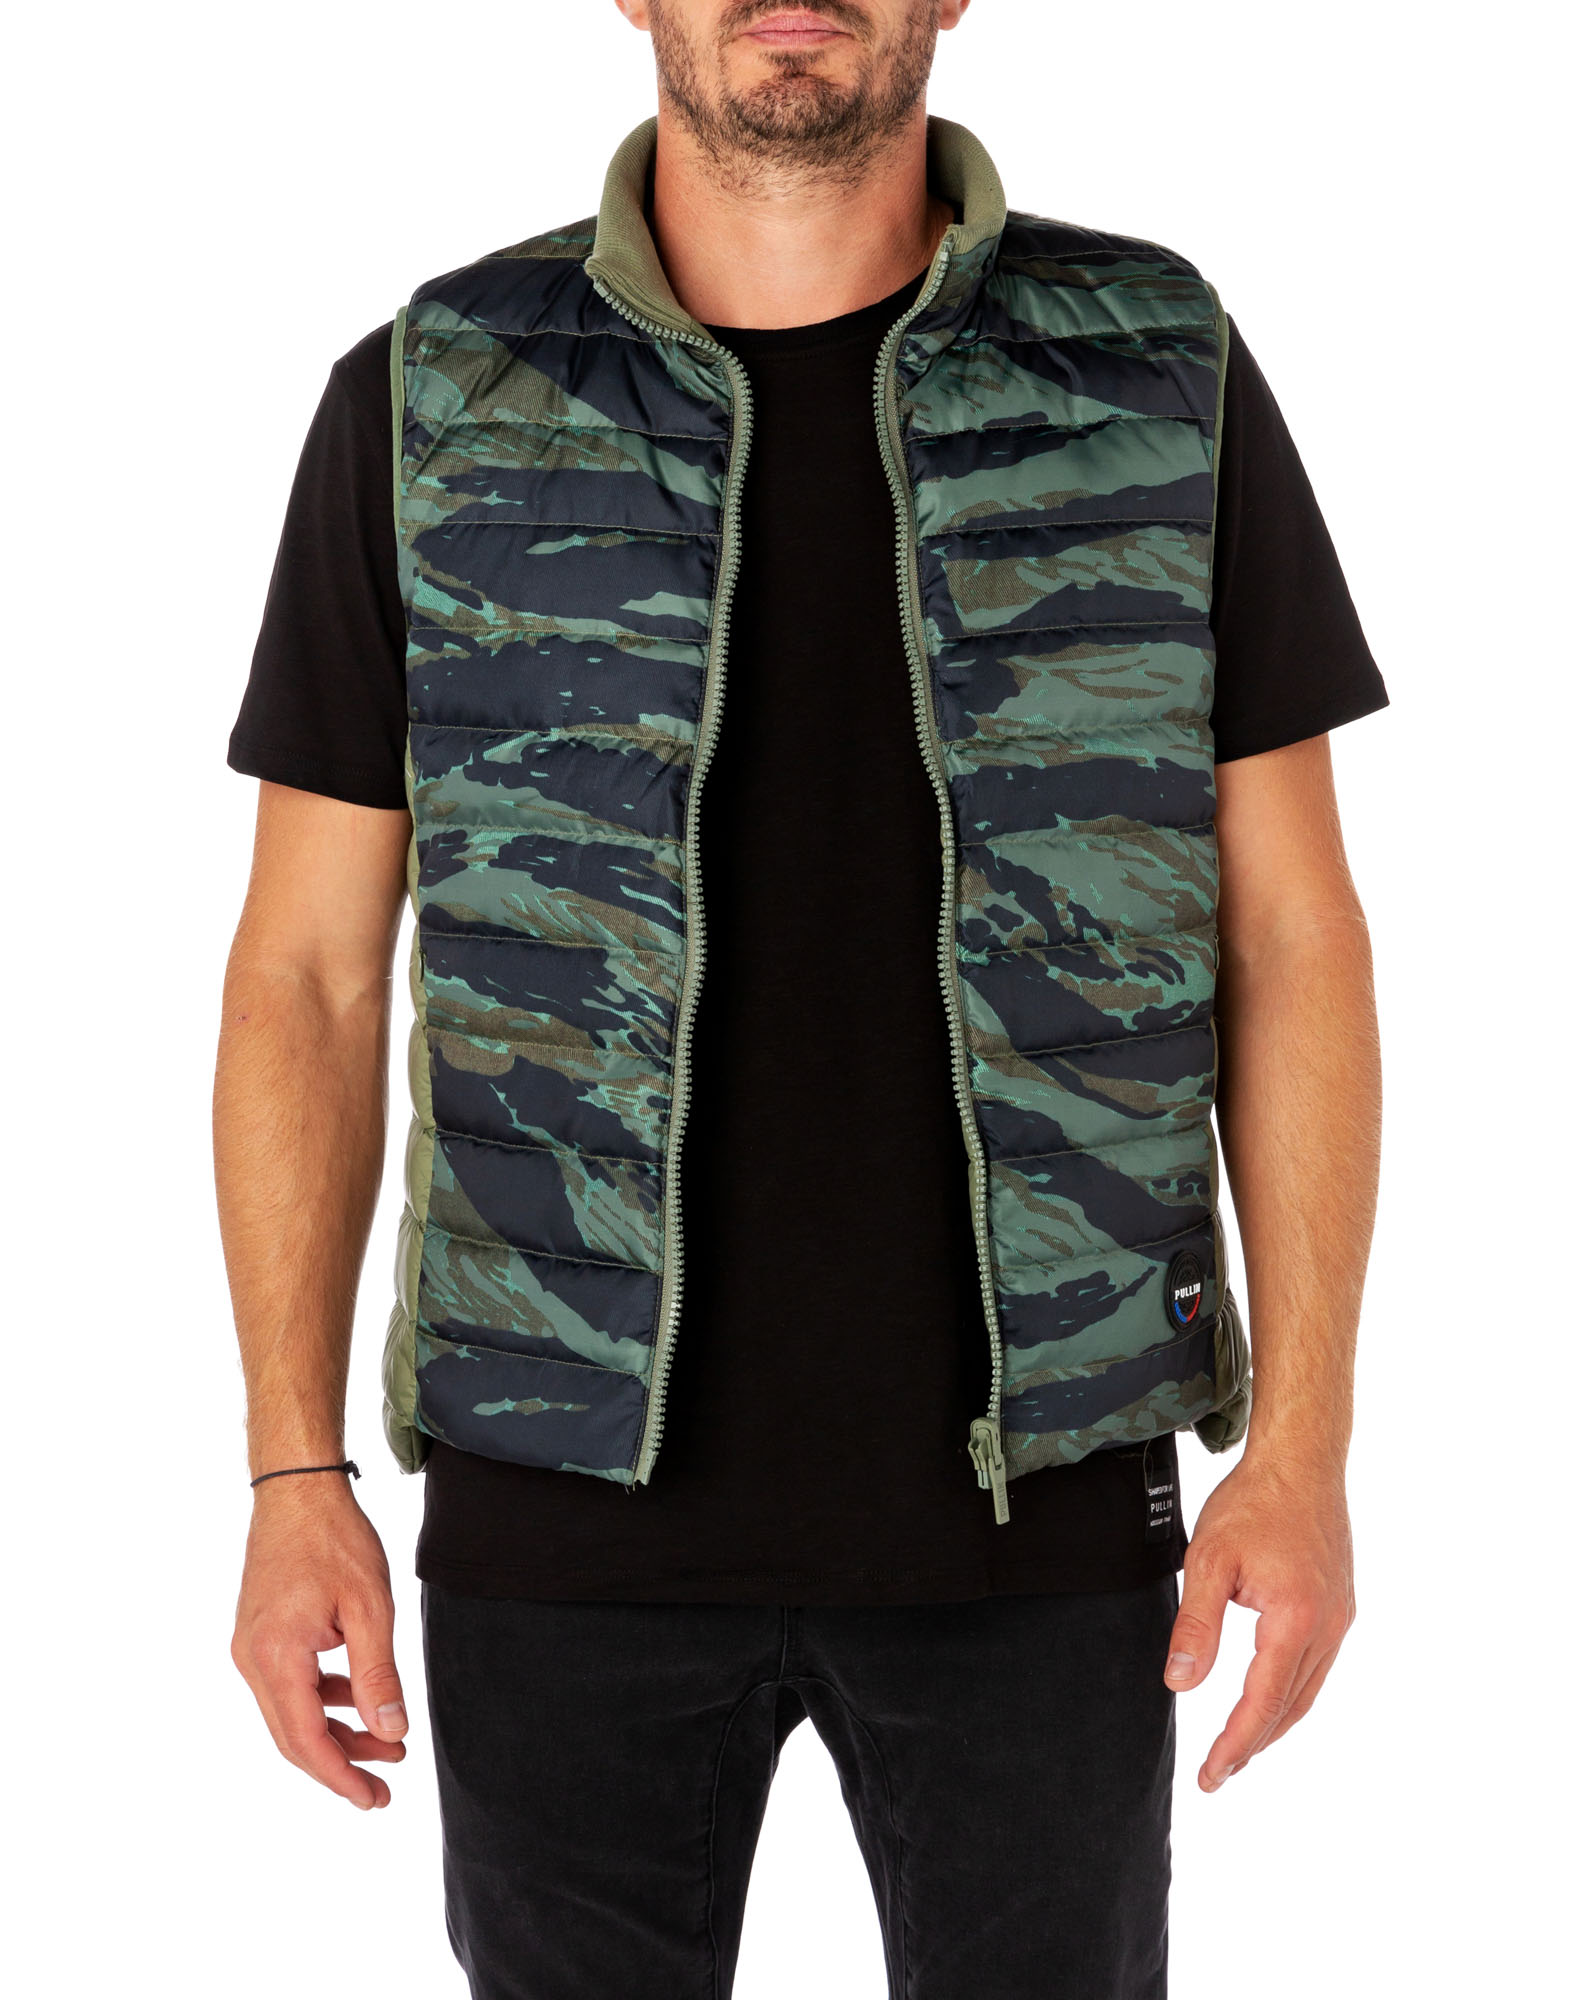 Men's feather jacket without sleeves TIGERCAMO